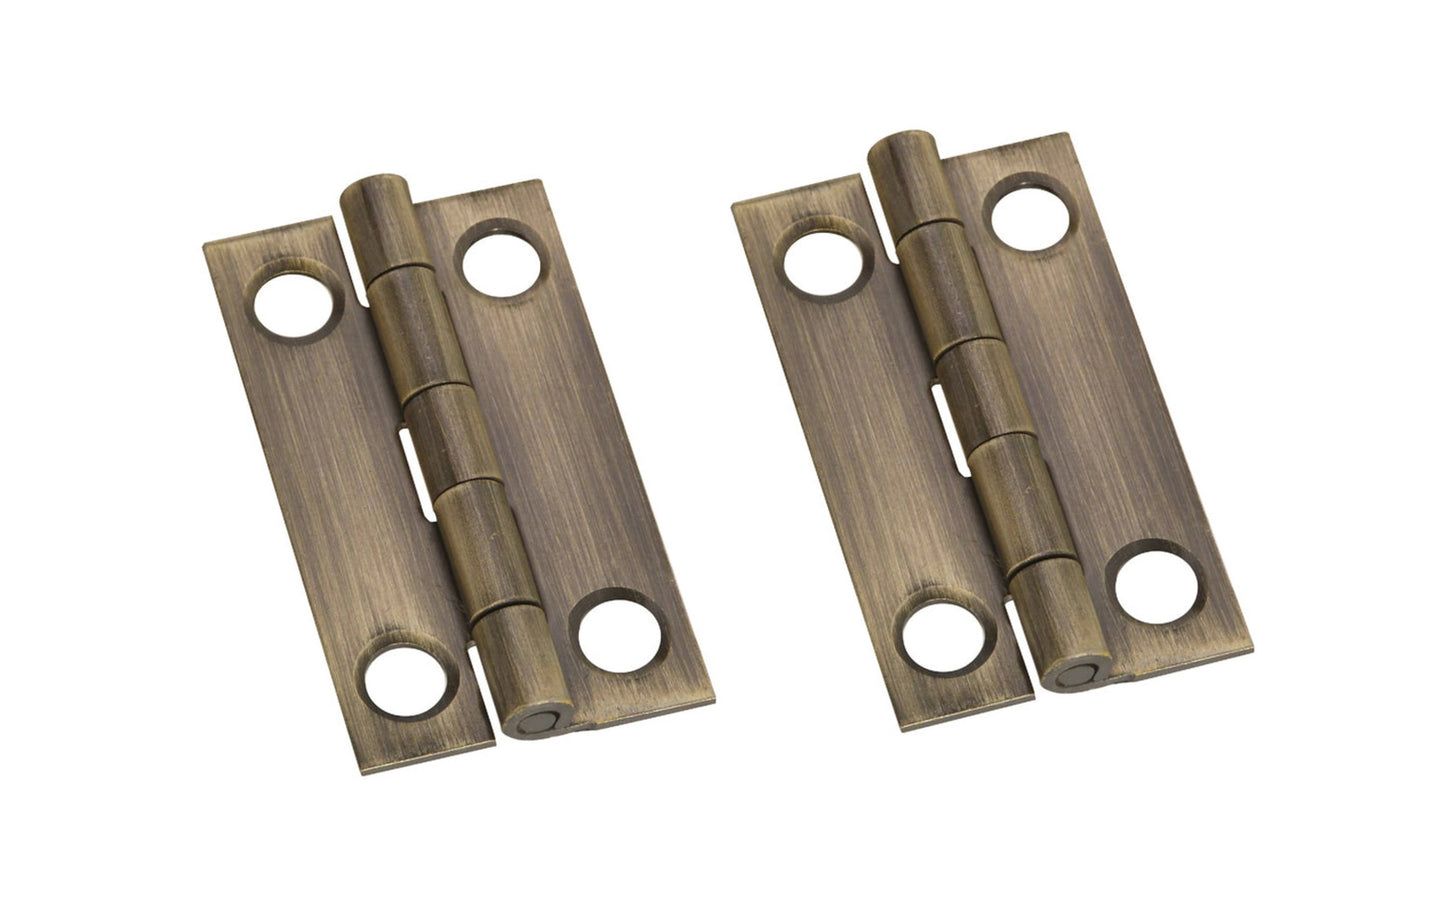 1-1/2" x 7/8" Antique Brass Hinges ~ 2 Pack ~ Antique brass hinges add a decorative appearance to small boxes, jewelry boxes, small lightweight cabinet doors, craft projects. Made of solid brass material with an antique brass finish. 1-1/2" high x 7/8" wide. Surface mount. Non-removable pin. Pair of hinges. 2 Pack. National Hardware Model No. N211-227. 